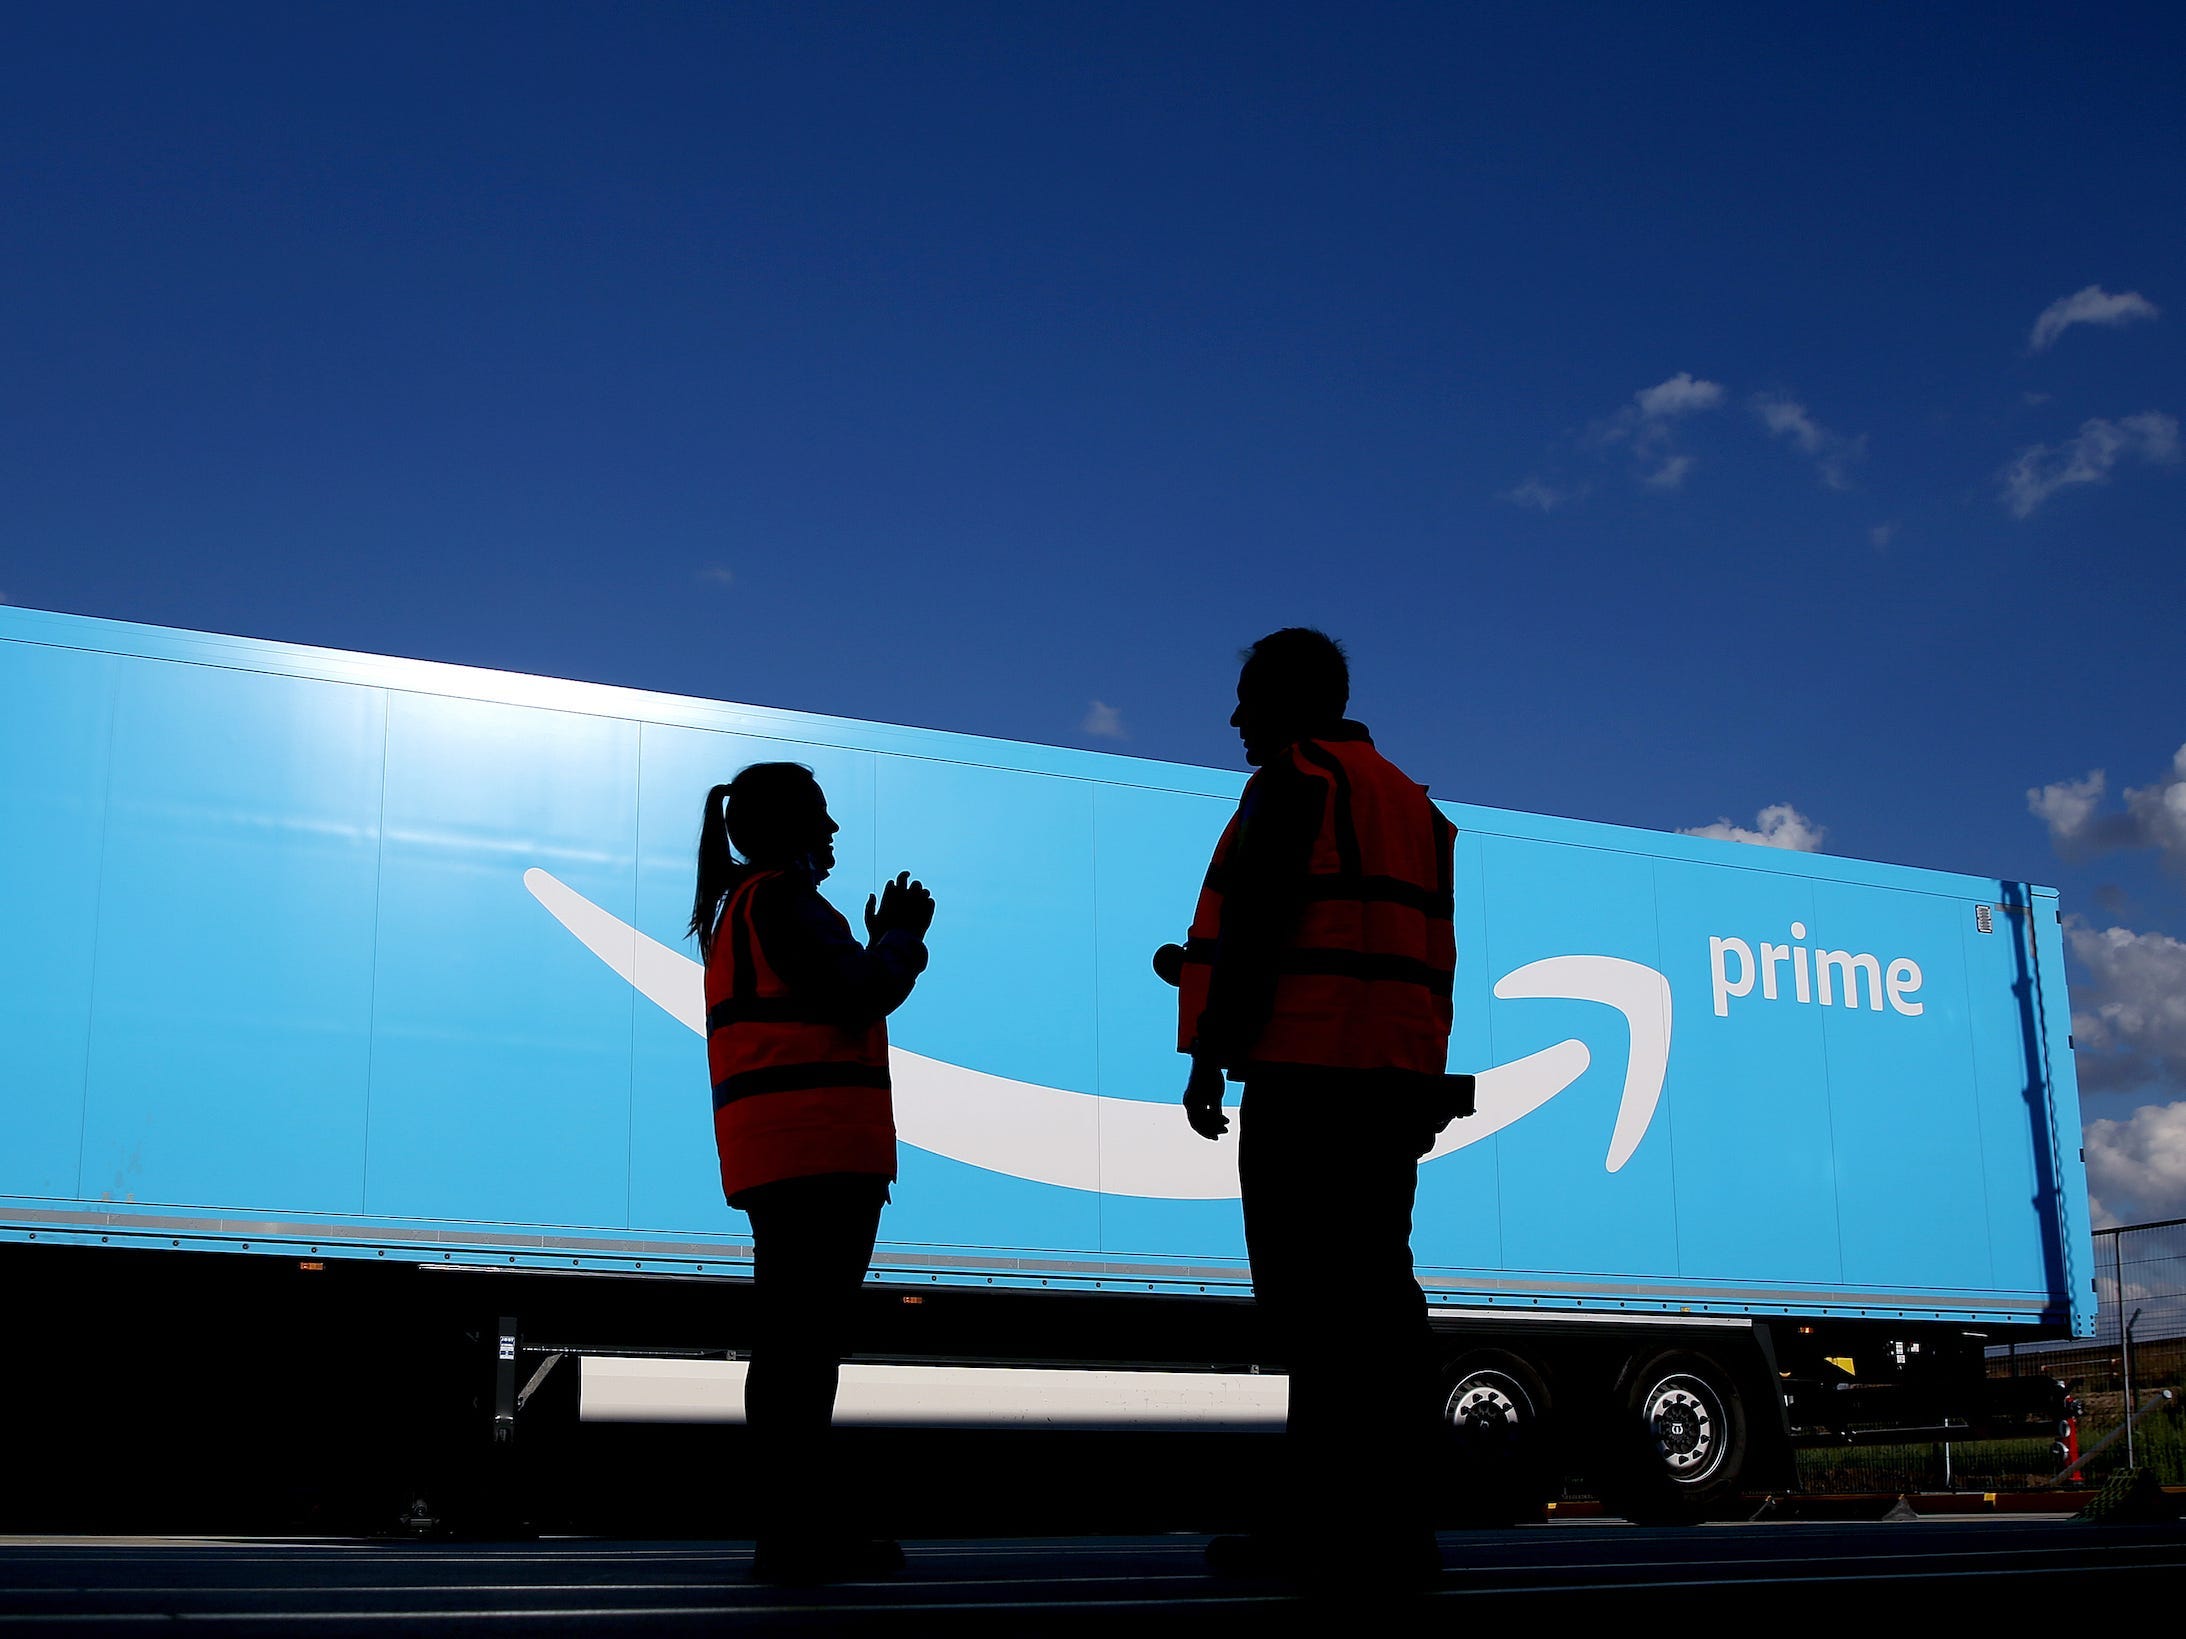 Amazon workers stand in front of a large "Amazon Prime" branded truck trailer.